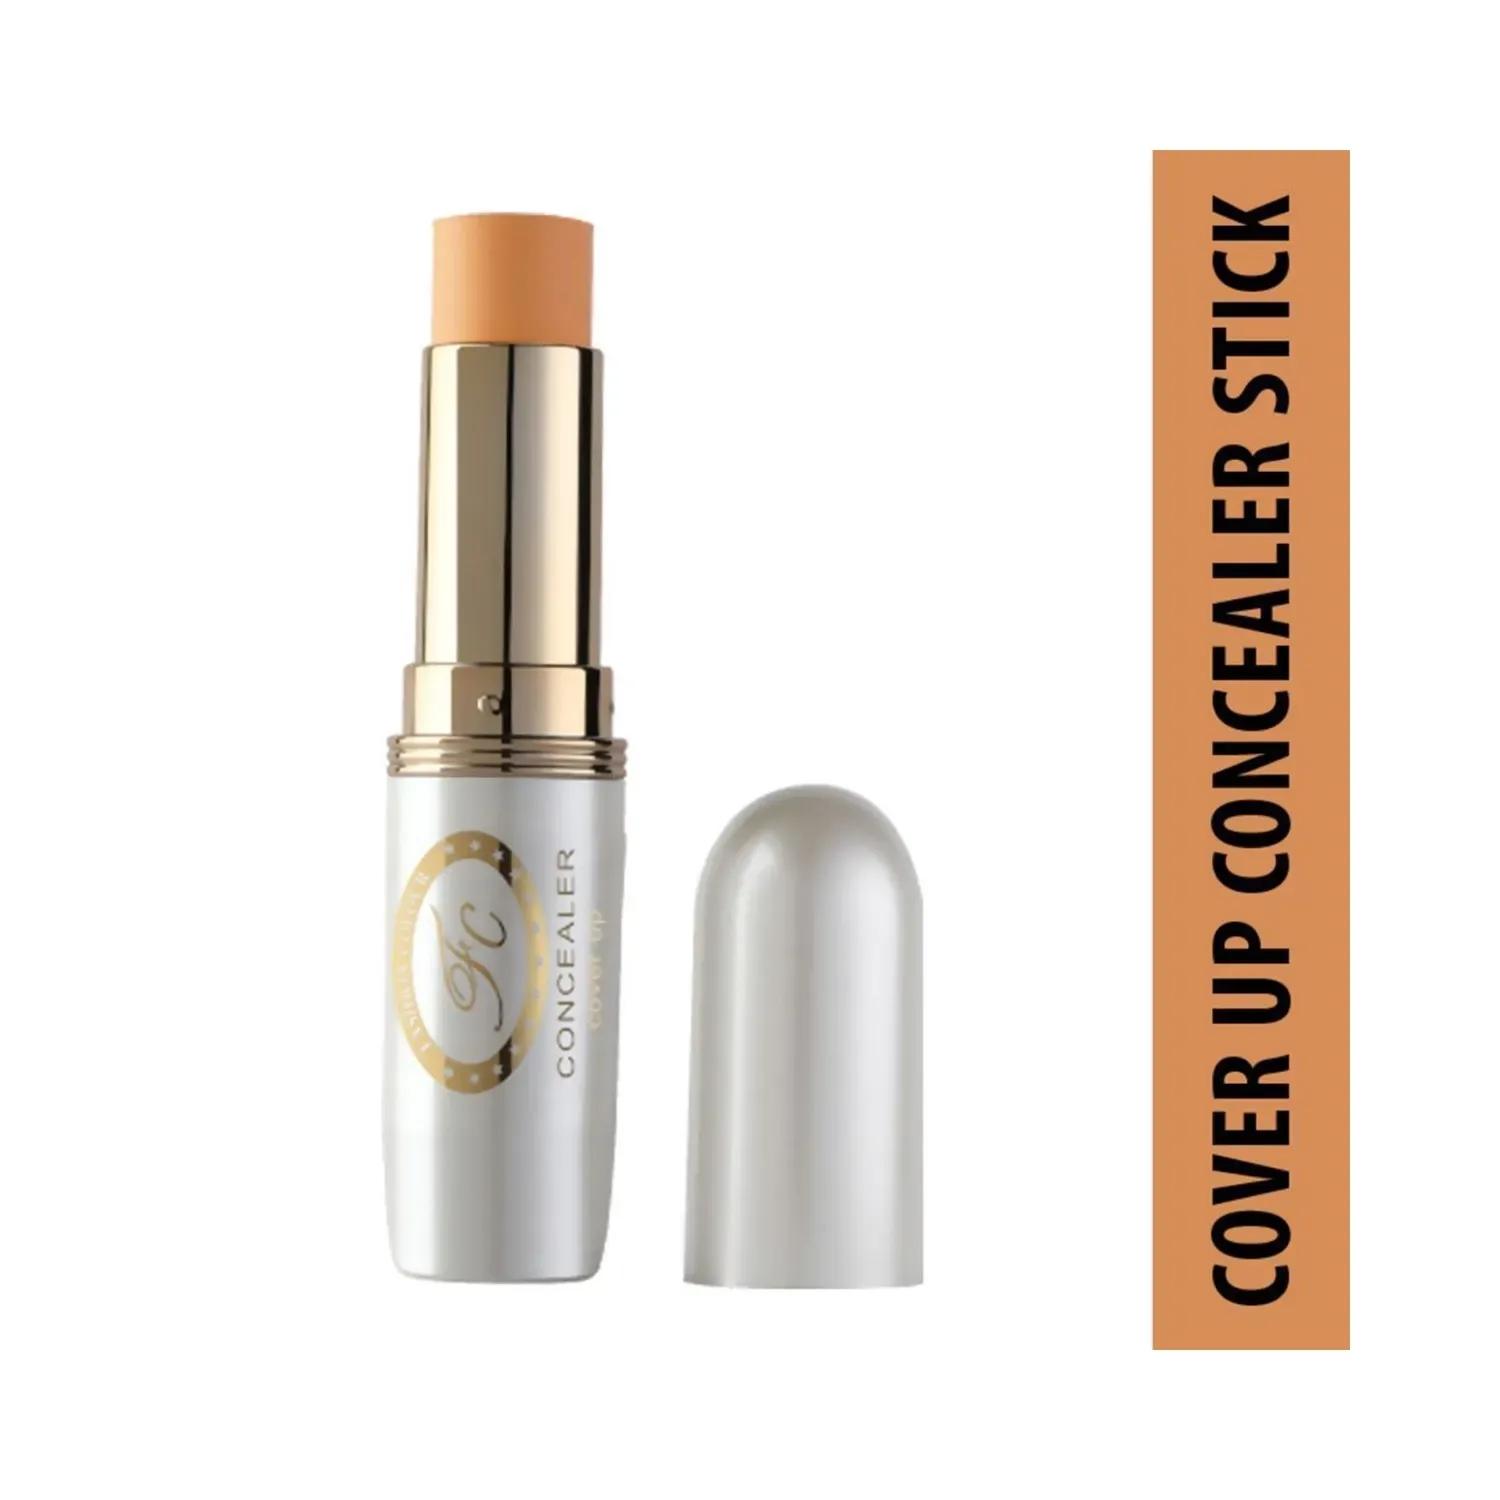 fashion colour cover up concealer stick - 04 shade (10g)